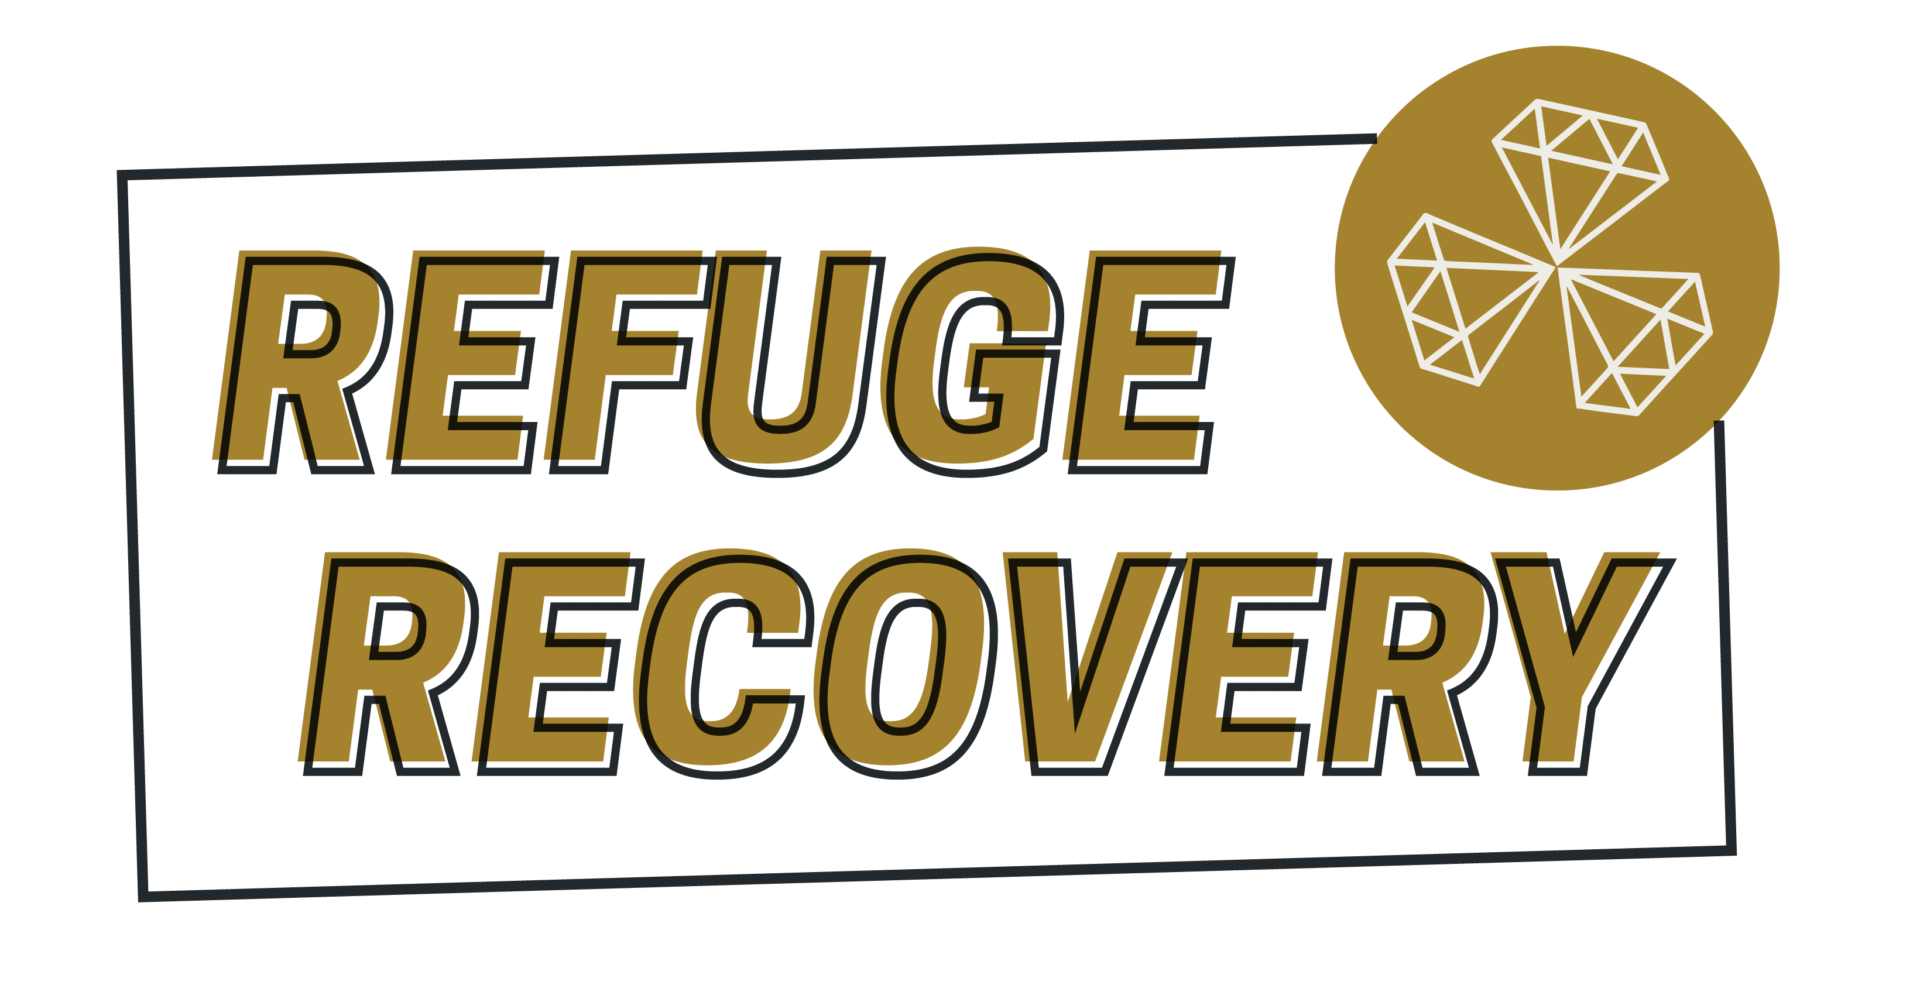 Recovery Logo - A Buddhist Inspired Path to Recovery from Addiction - Refuge Recovery